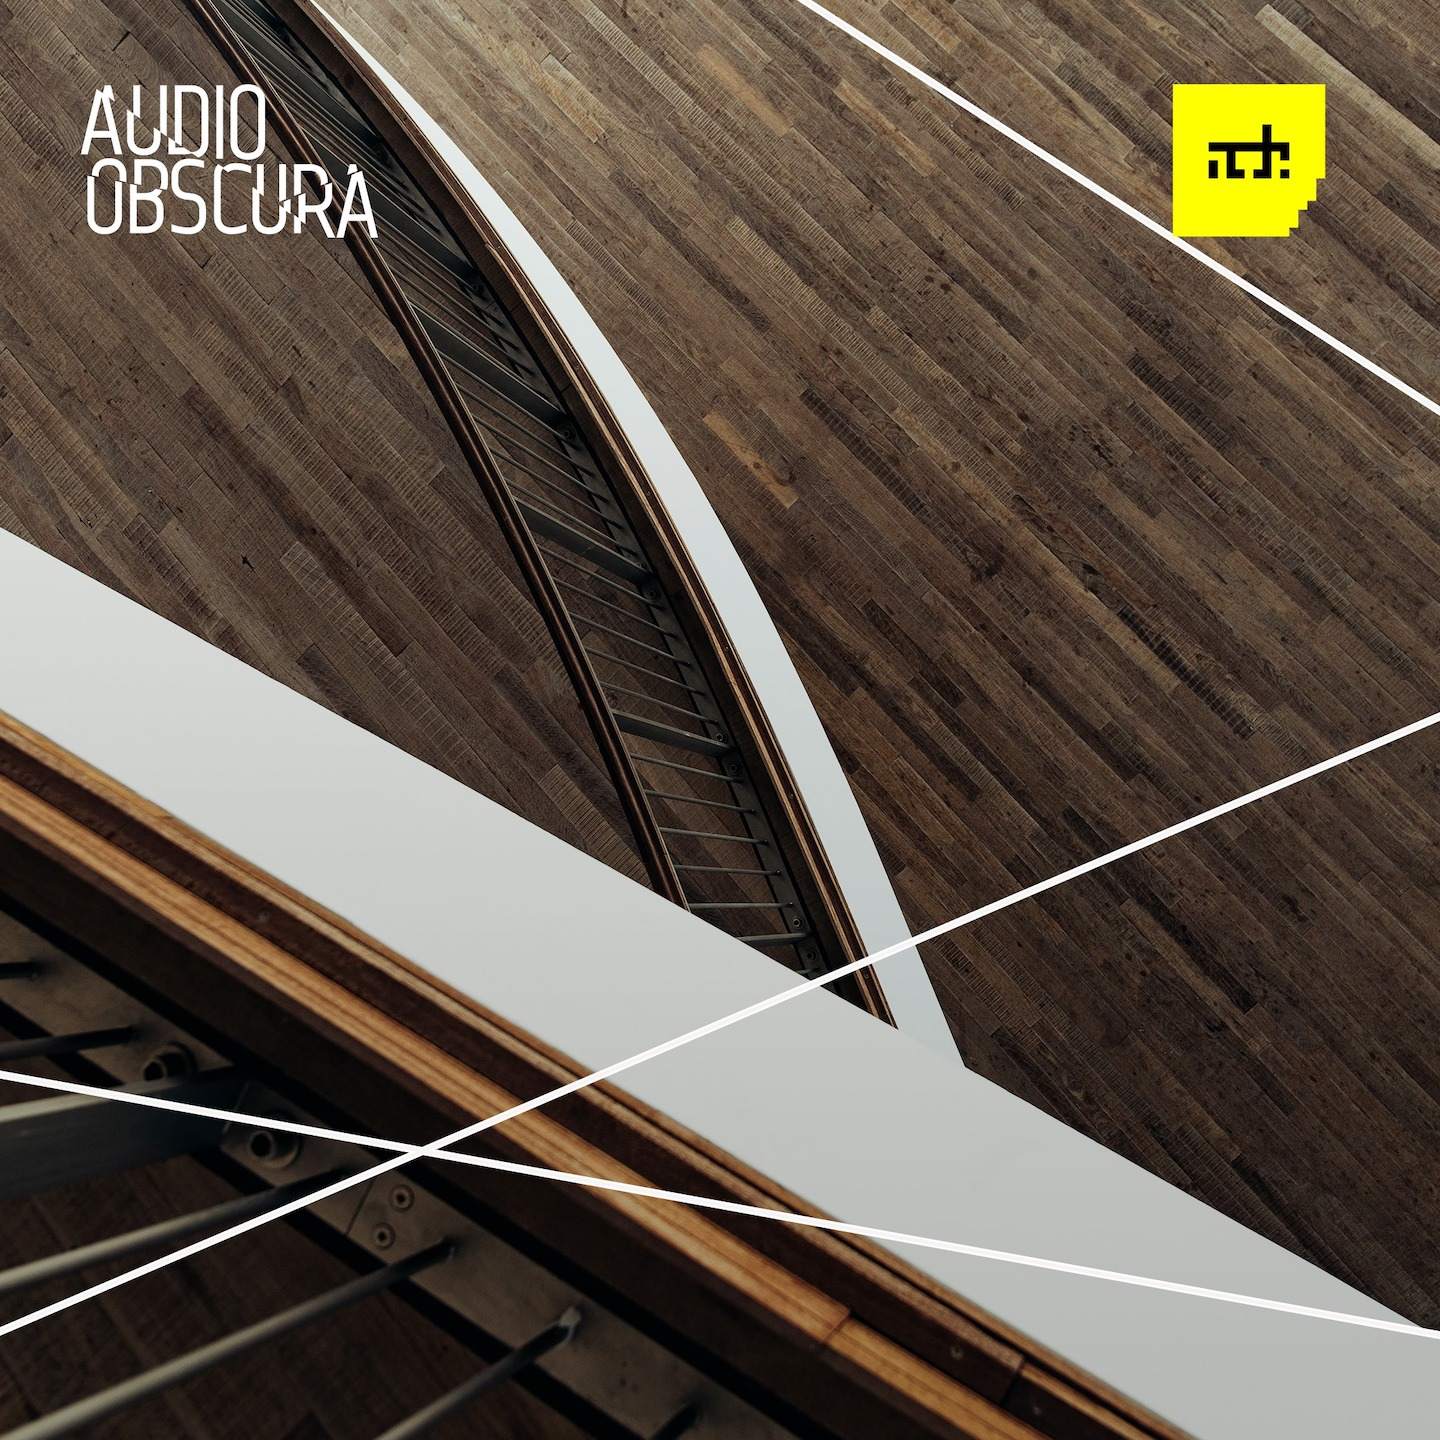 Amsterdam party Audio Obscura reveals plans for ADE 2019 image